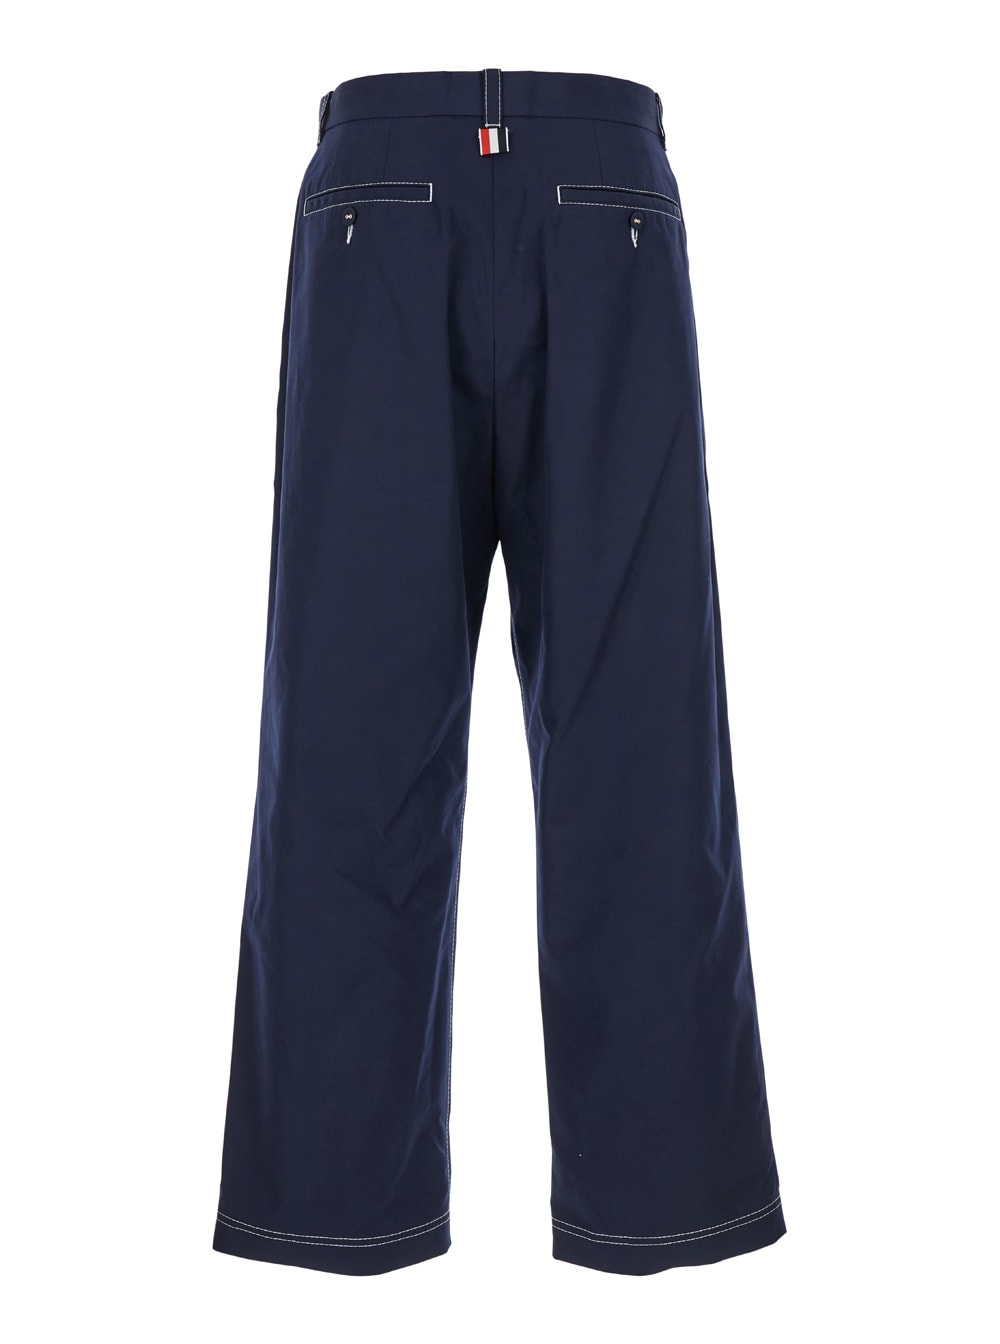 Thom Browne Unconstructed Straight Leg Single Welt Pocket Trouser In Typewriter Cloth In Blue